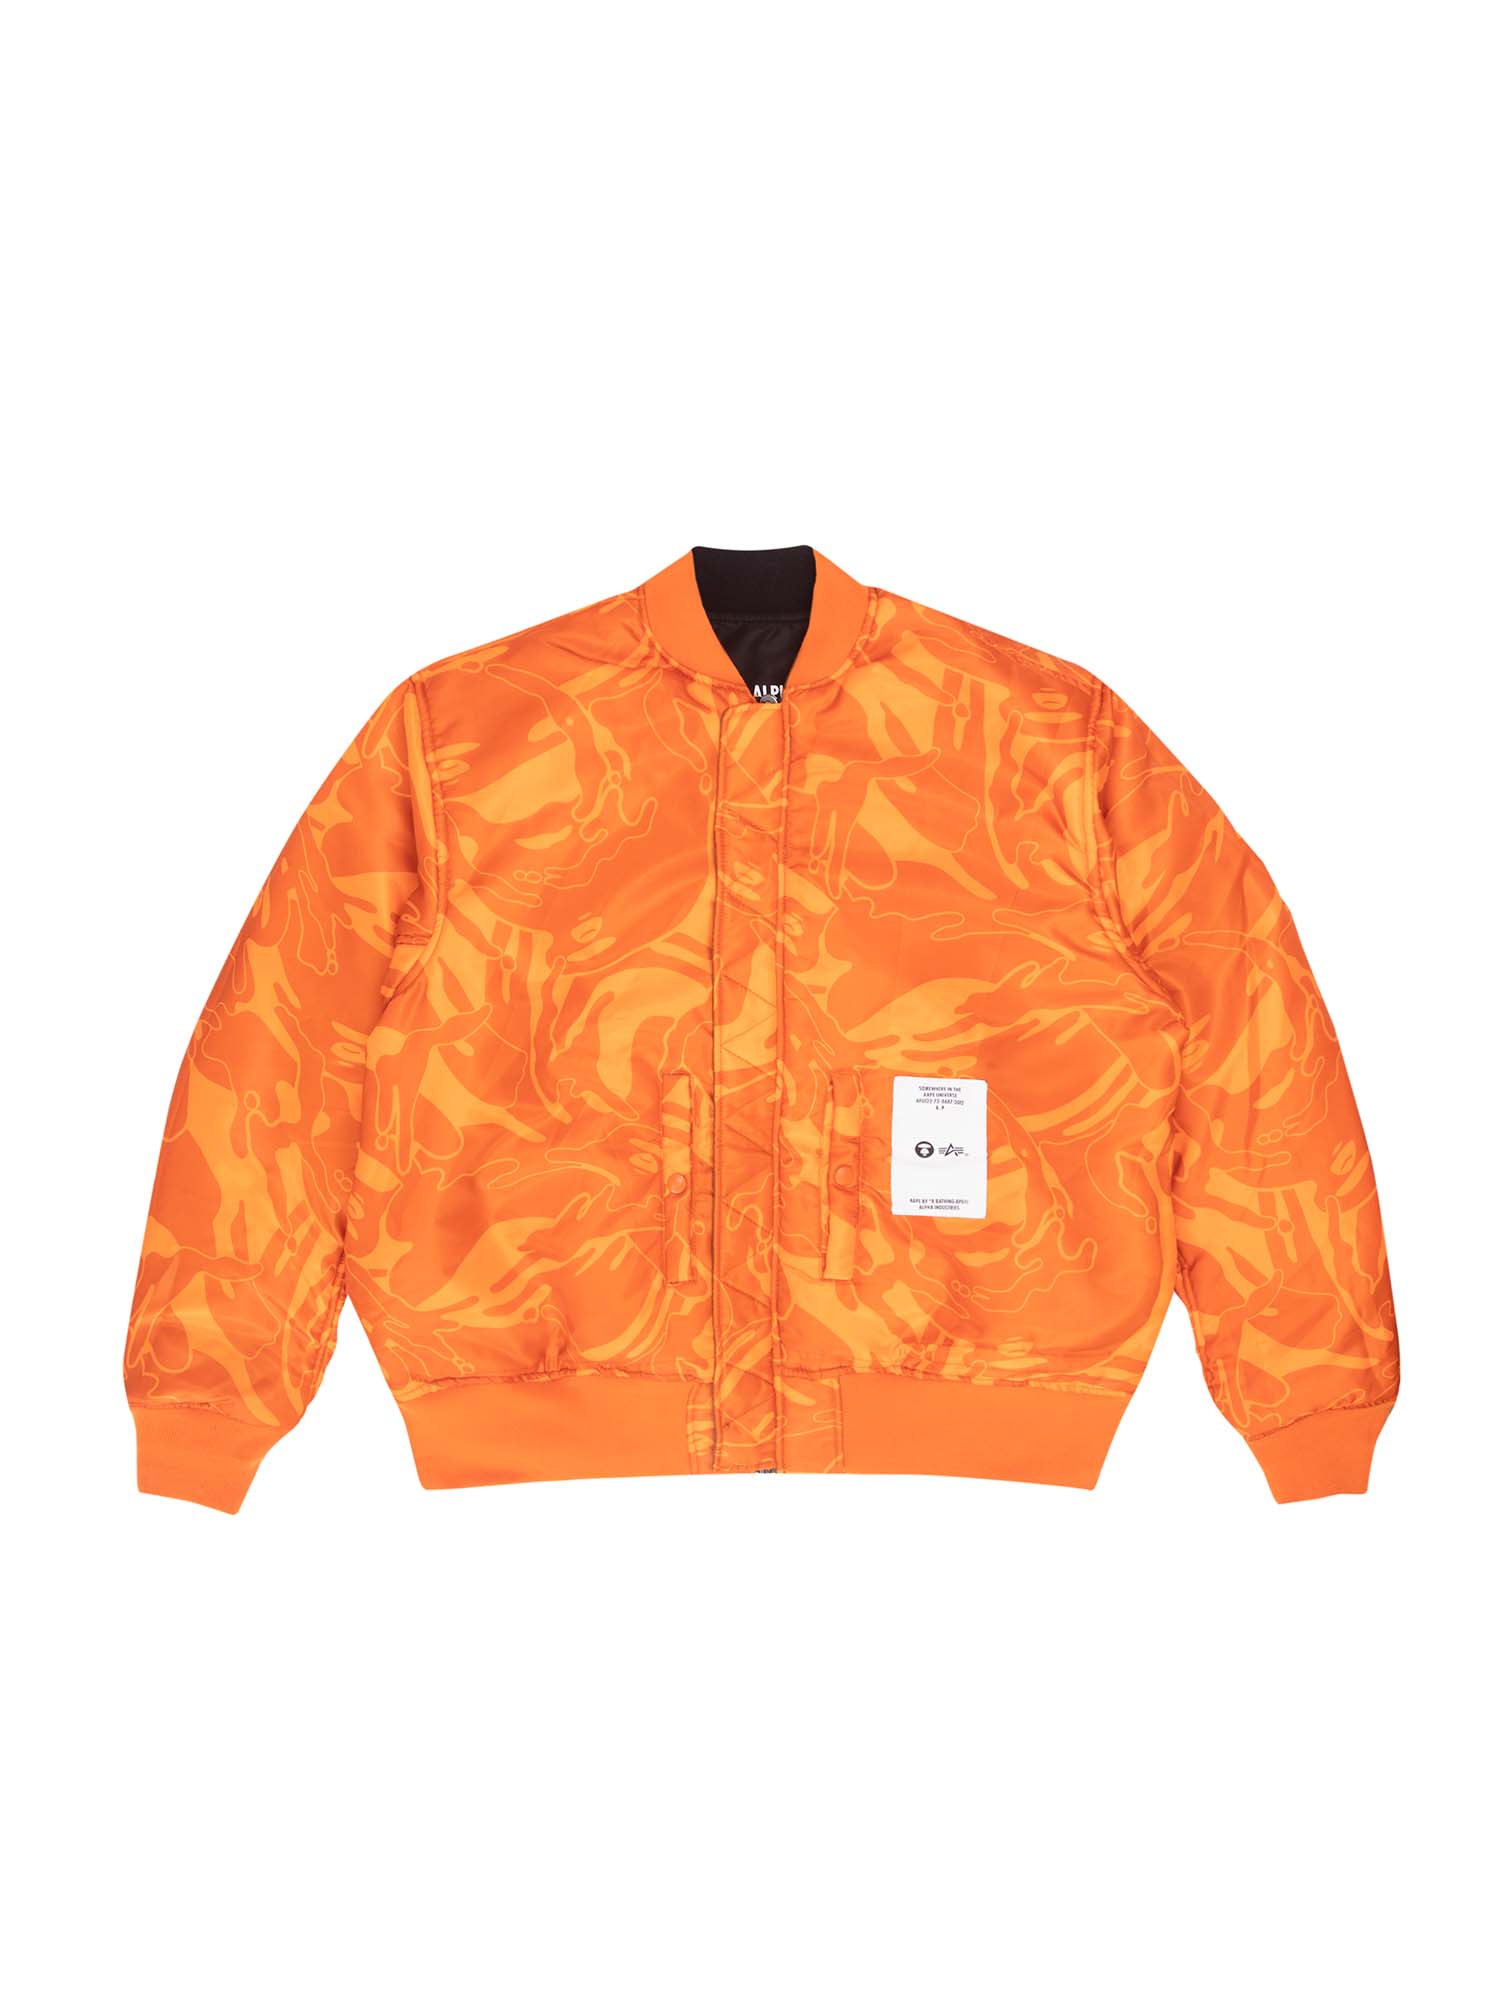 AAPE X ALPHA REVERSIBLE MA-1 QUILTED JACKET OUTERWEAR Alpha Industries, Inc. 